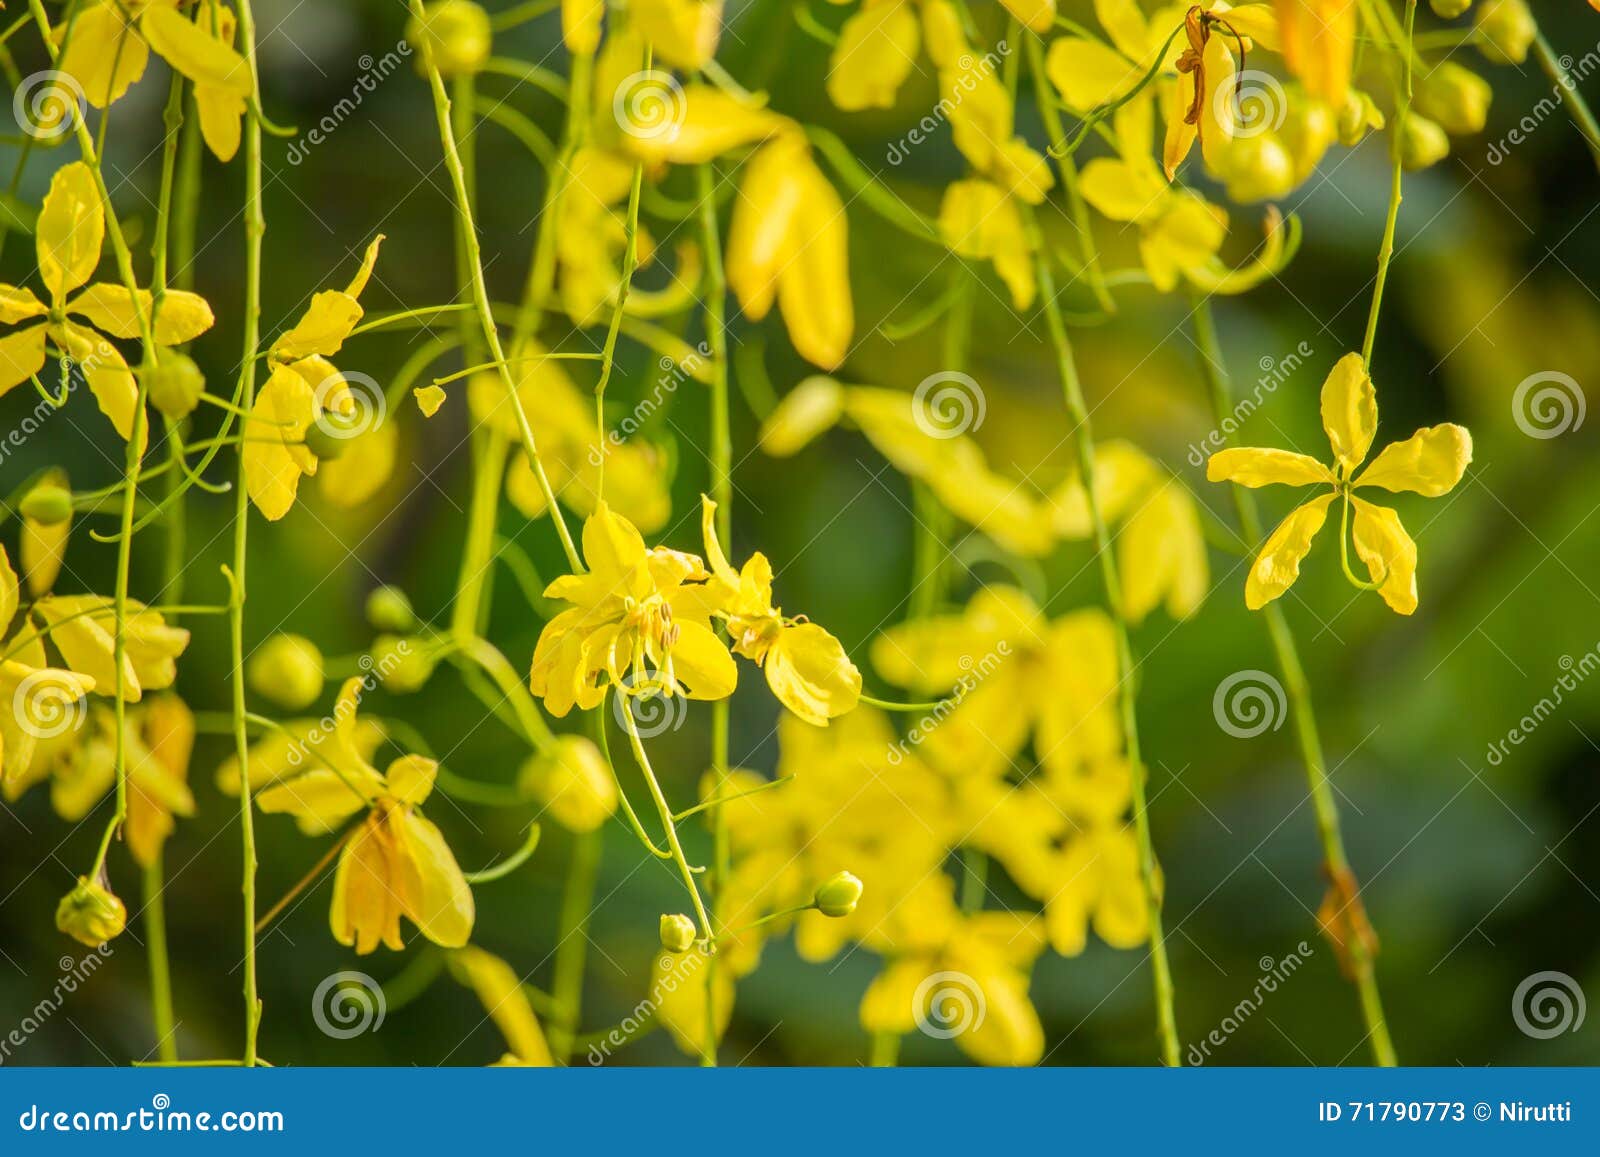 Yellow flowers. These flowers are called flowering laburnum